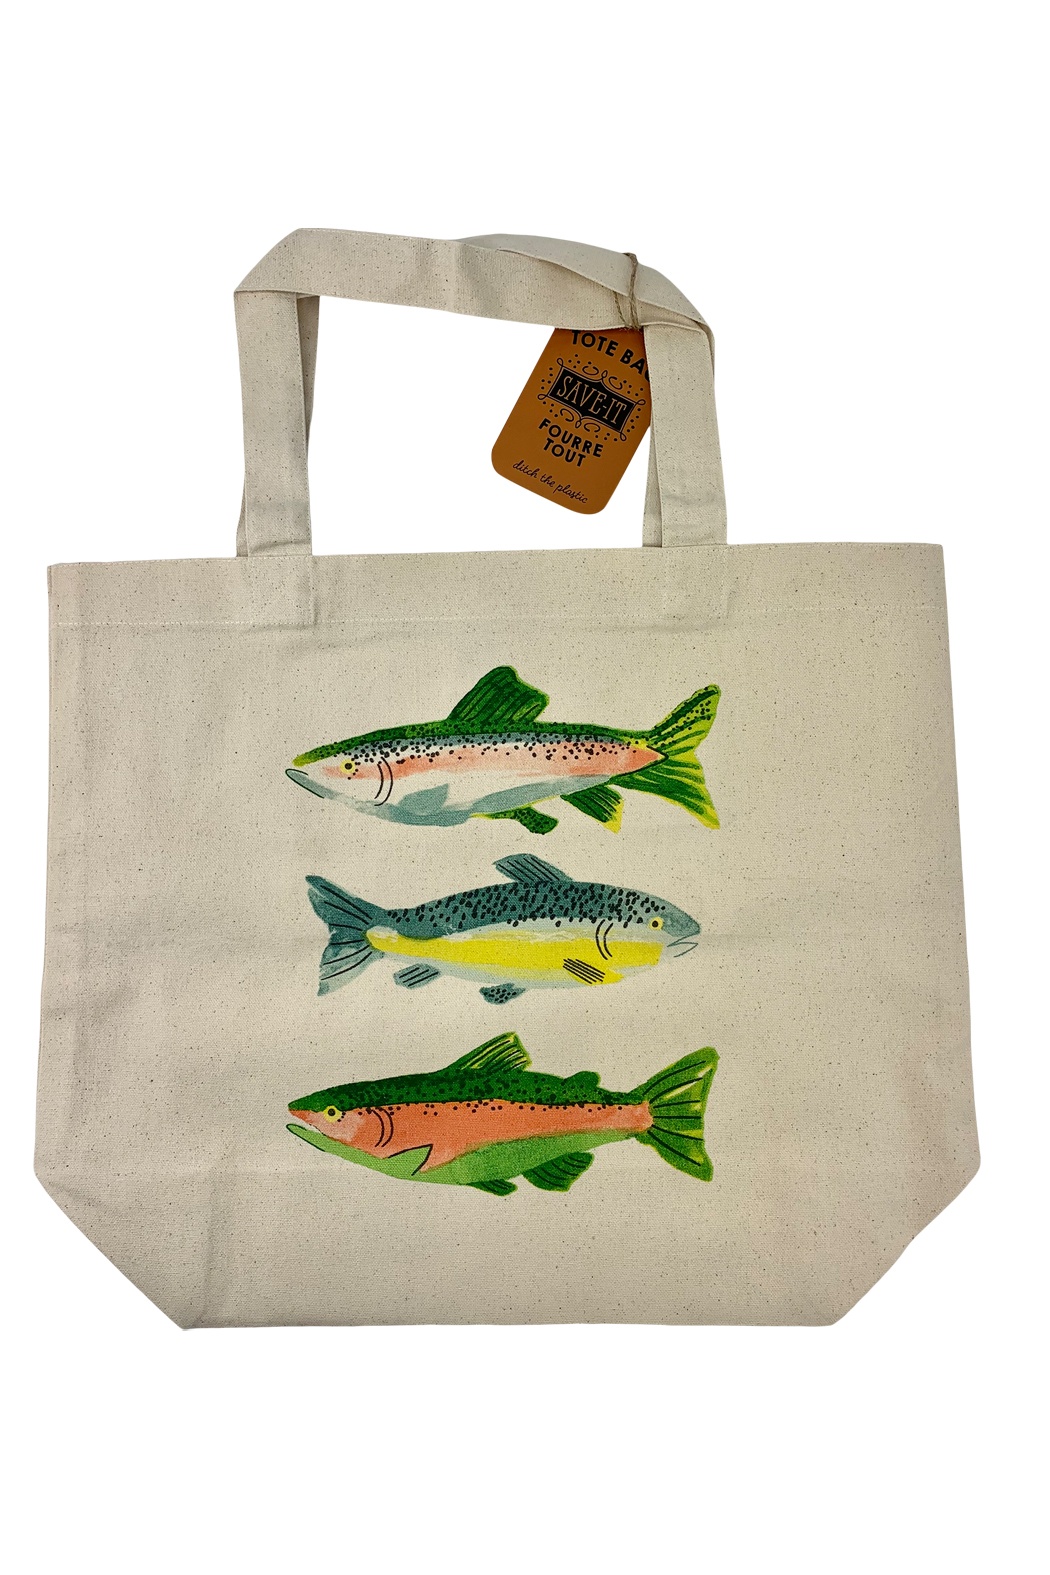 https://www.noyougohome.com/wp-content/uploads/2021/08/GH687.-Fish-Tote-1.jpg